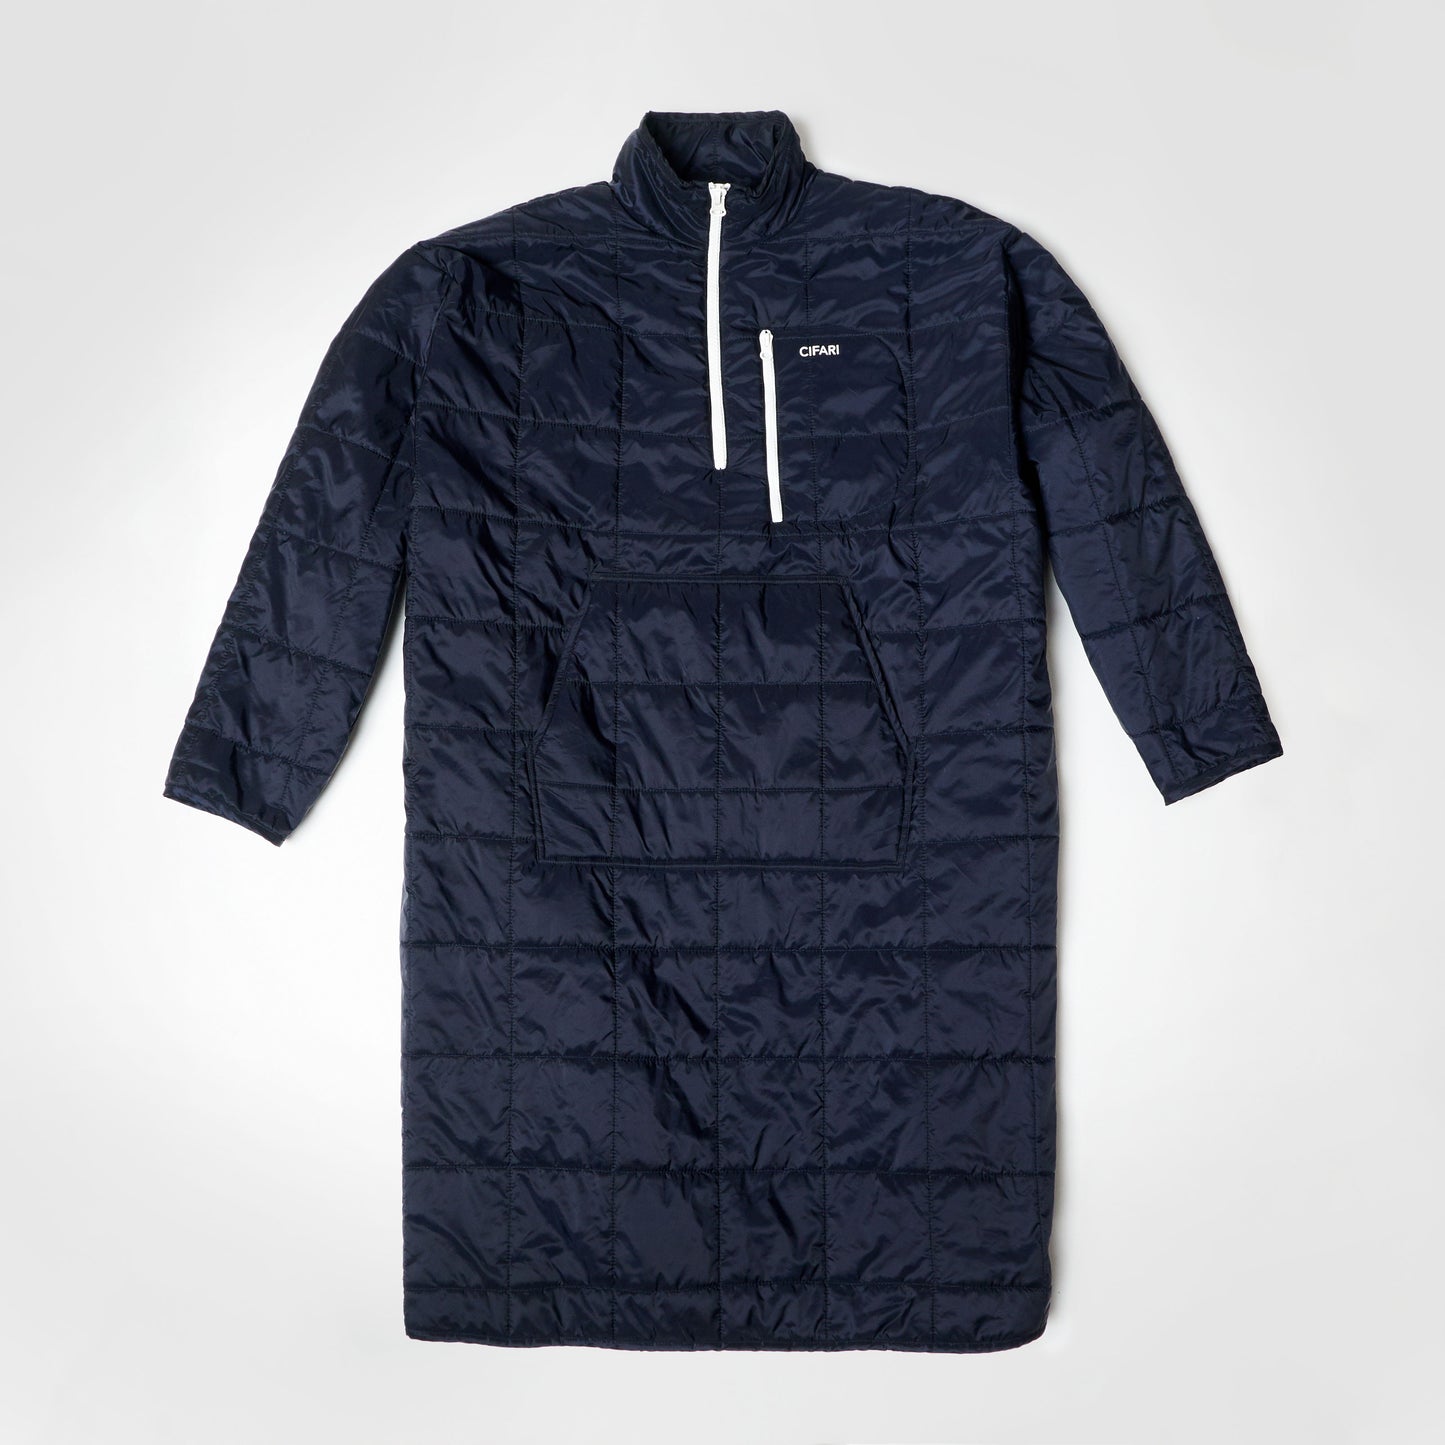 Adult Pullover Jacket